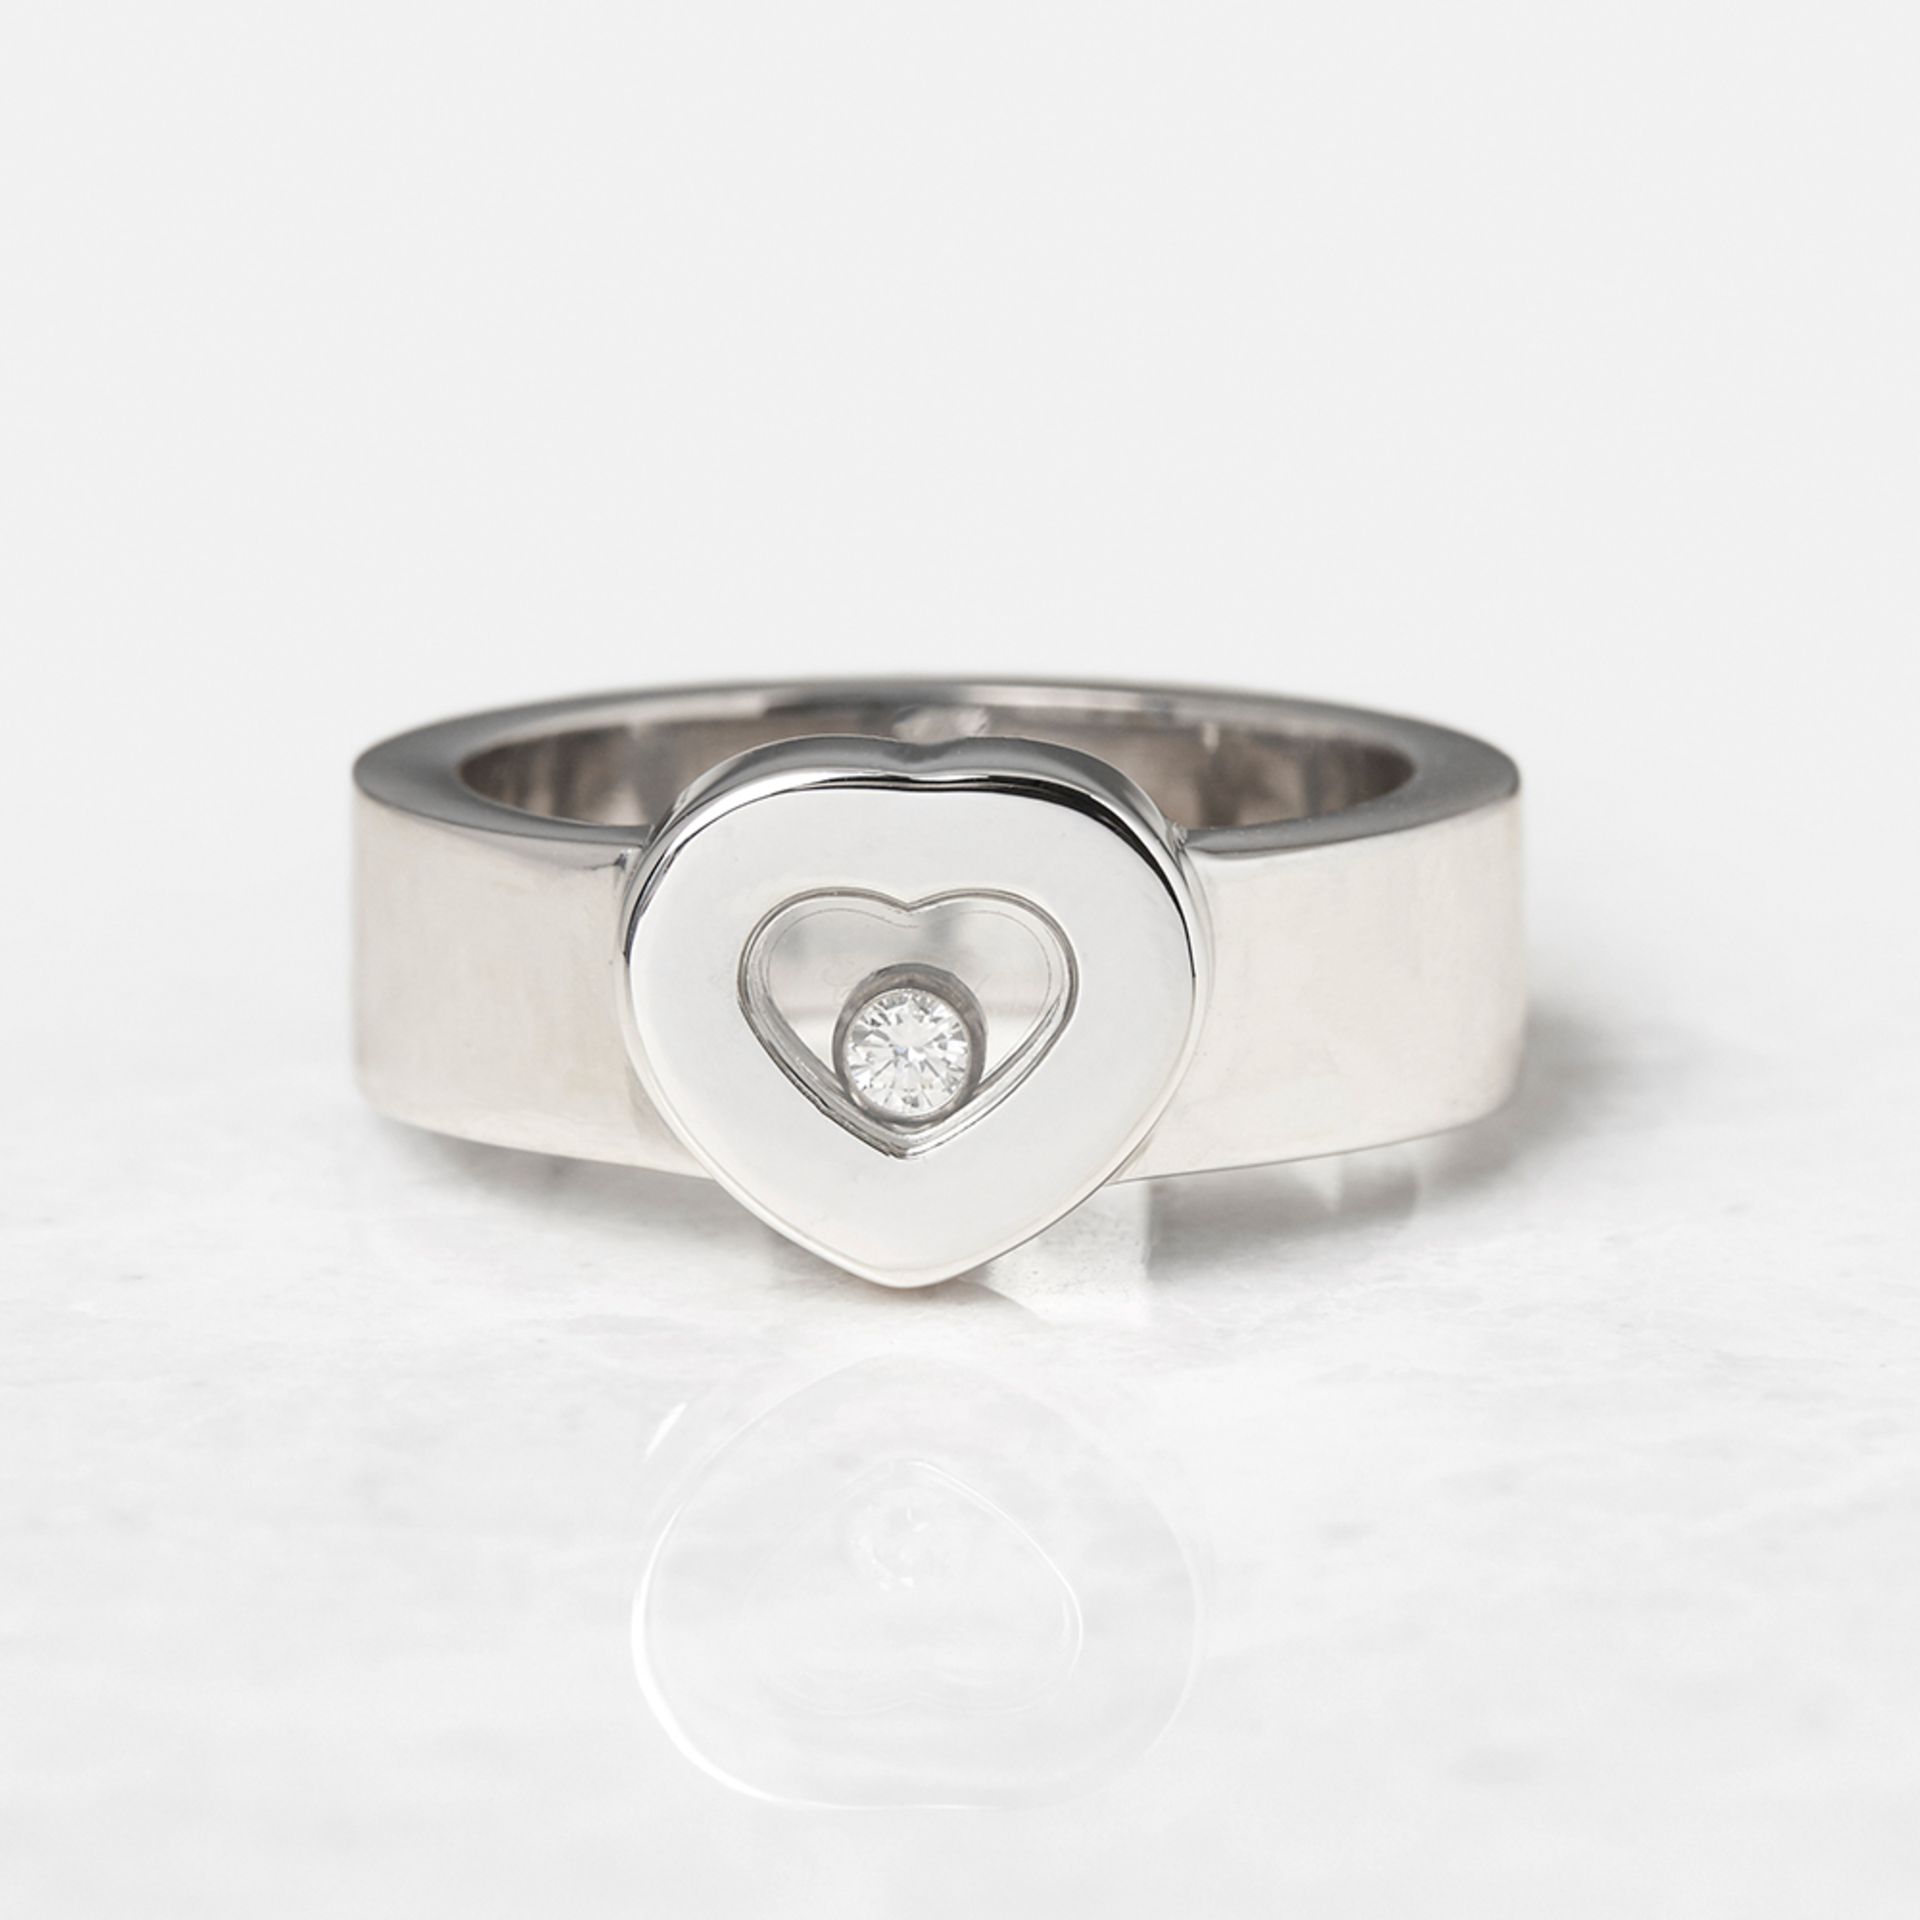 Chopard 18k White Gold Heart Happy Diamonds Ring - Image 6 of 7